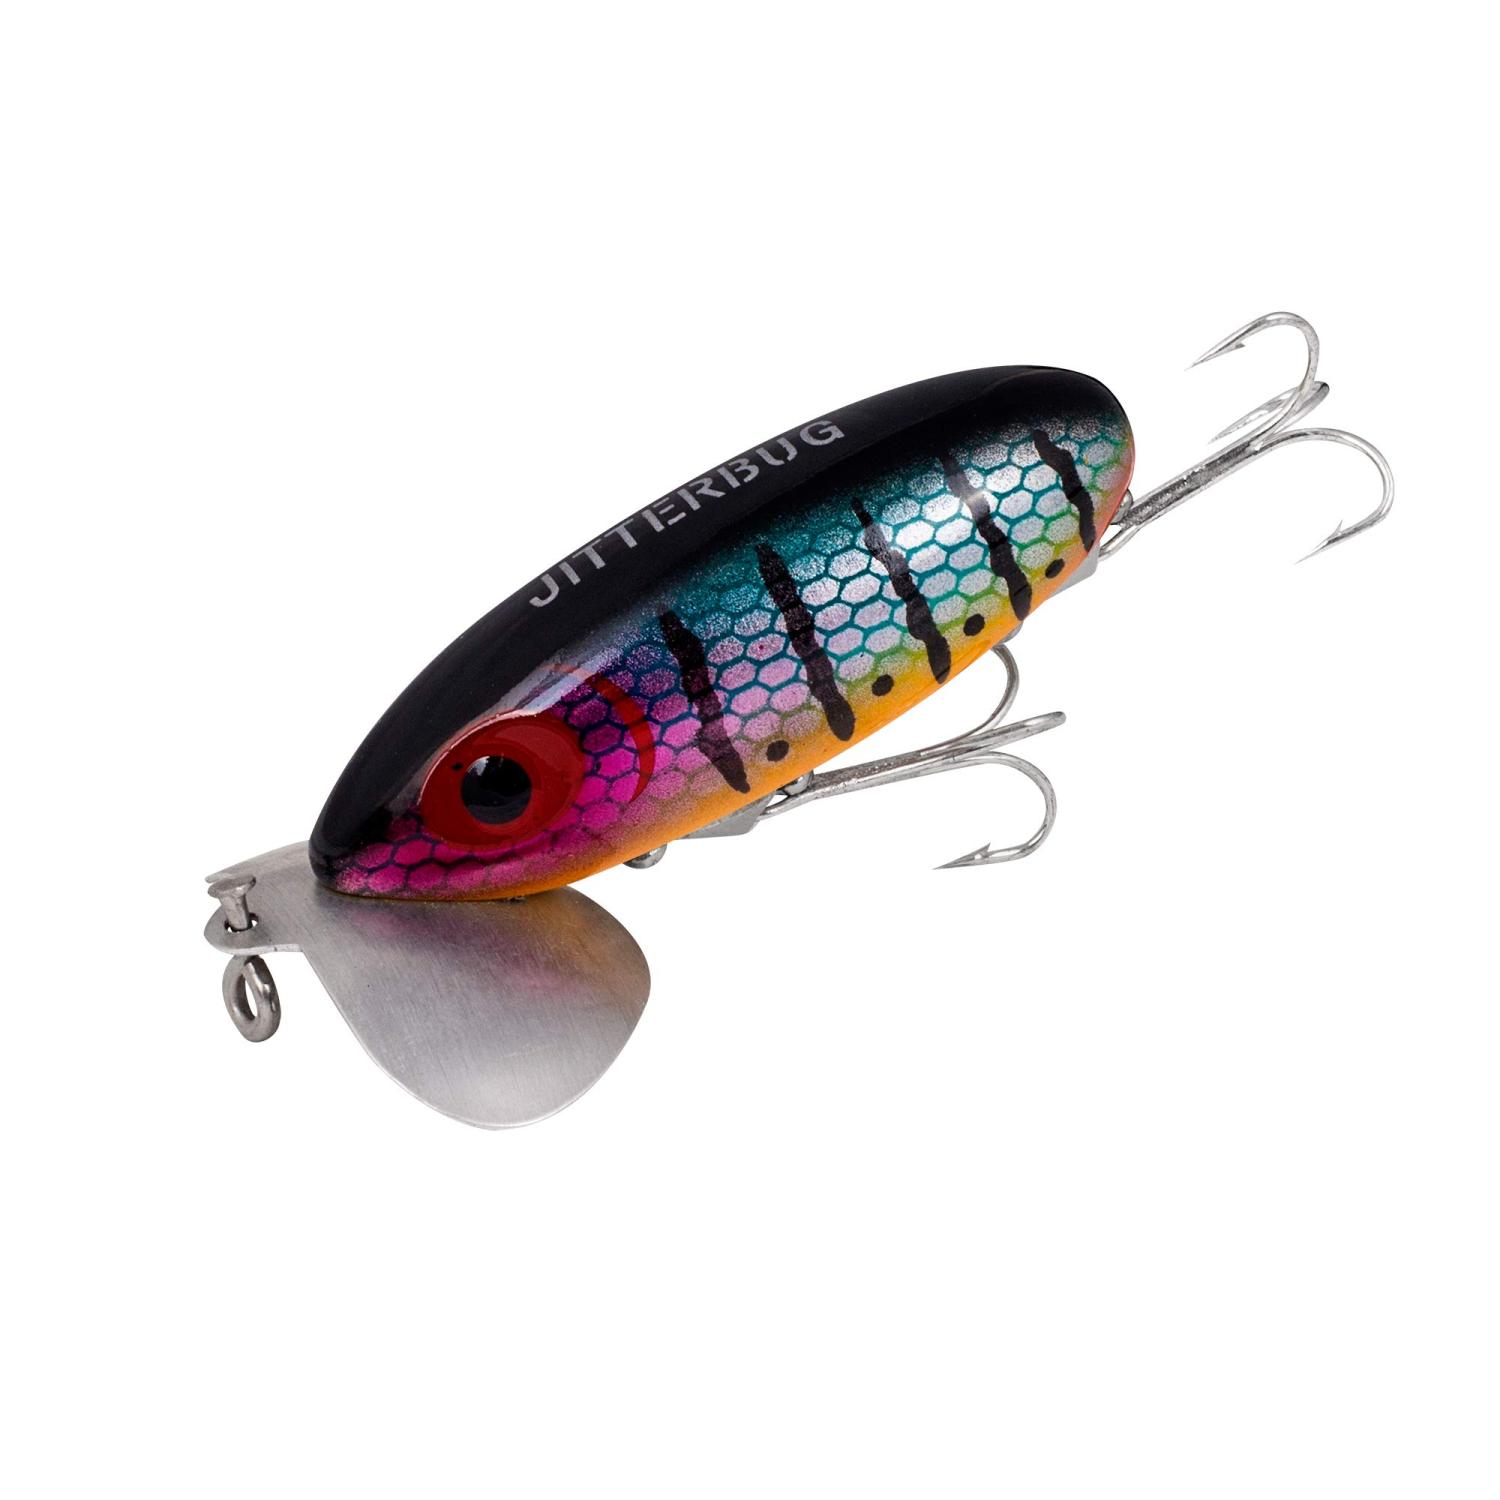 Lures for Striped Bass fishing in Gaspésie purchase online – Target Baits  Leurres